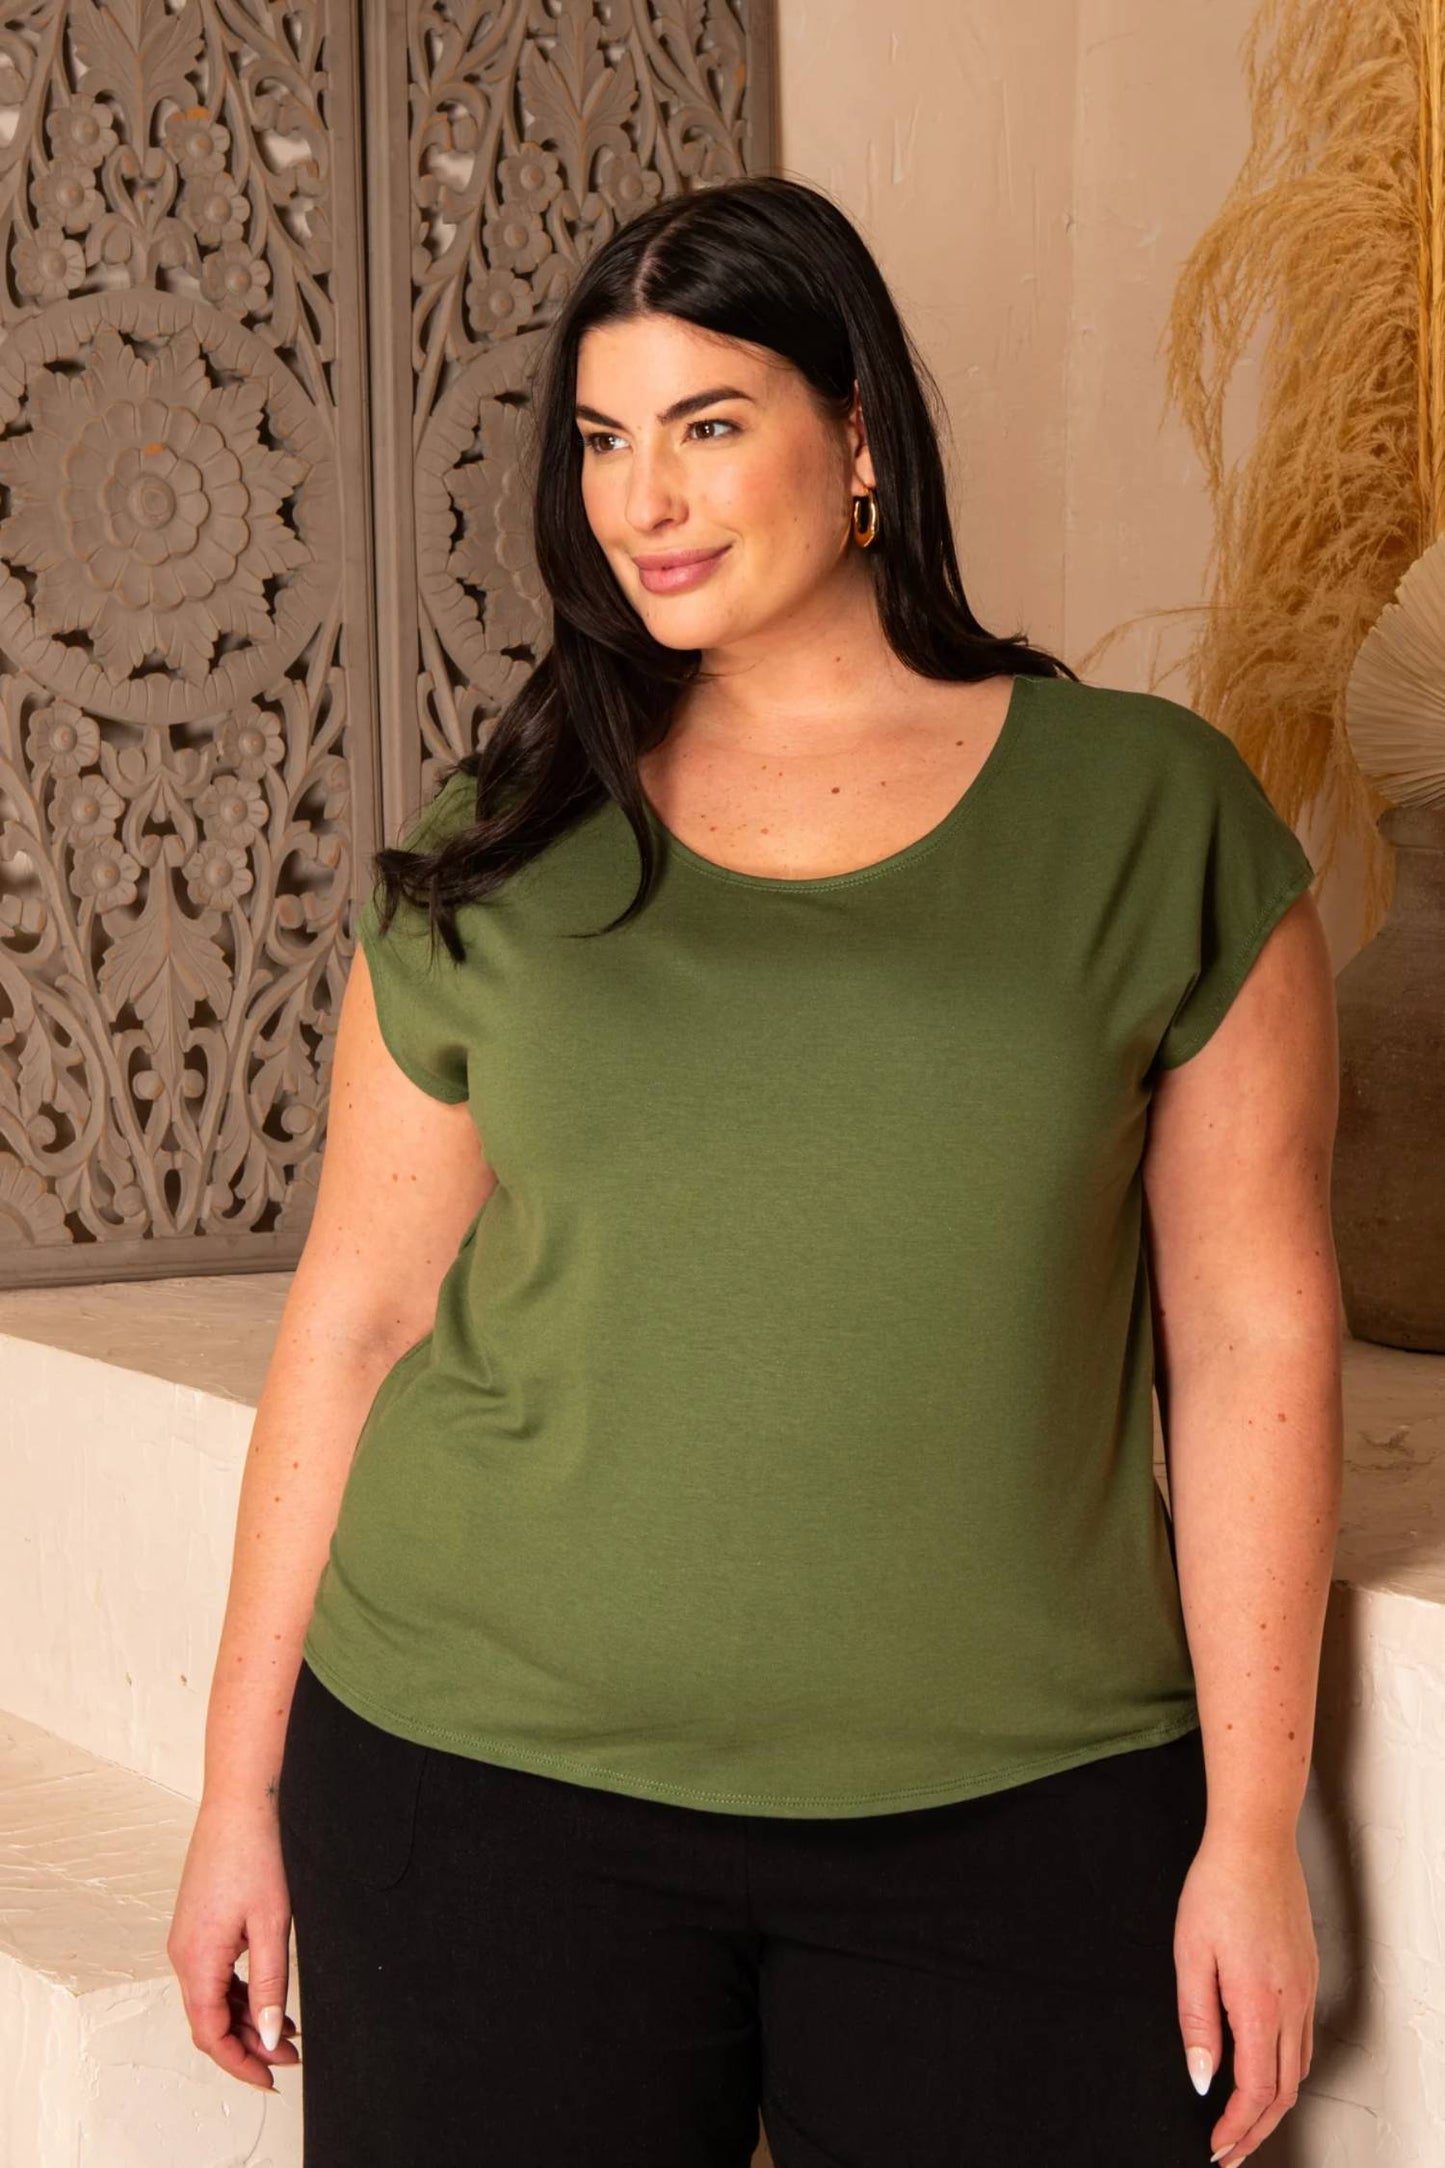 Cigale Top by Cherry Bobin, Green, classic t-shirt, round neck, short extended sleeves, semi-fitted cut, eco-fabric, bamboo and cotton, sizes XS to 2XL, made in Quebec